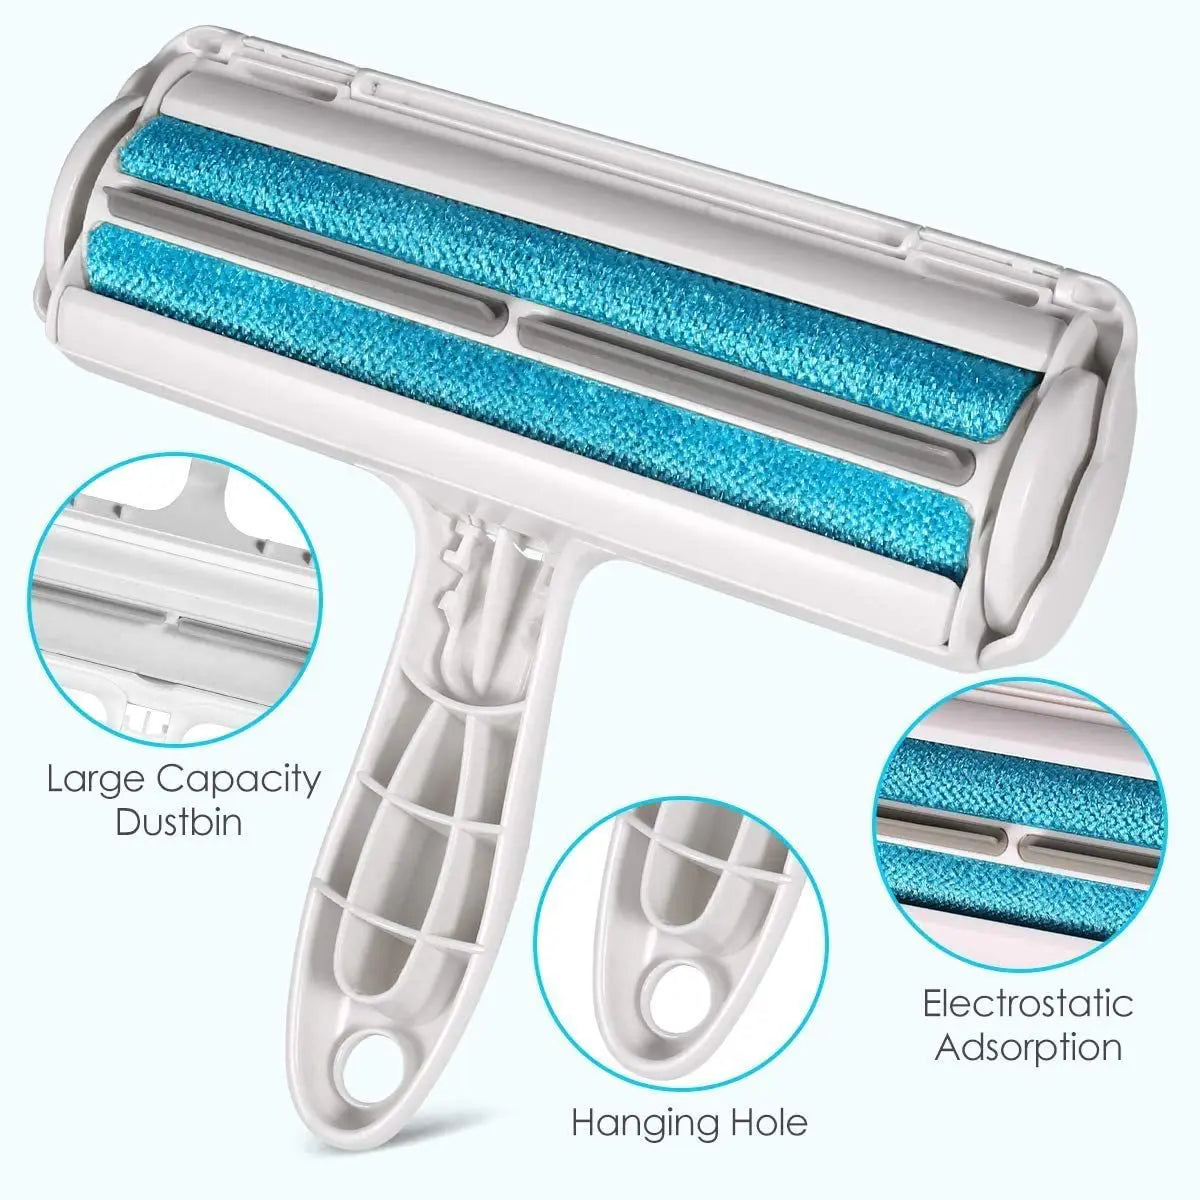 Pet Hair Remover Roller - Dog & Cat Fur Remover with Self-Cleaning Base - Efficient Animal Hair Removal Tool - Perfect for Furni - Hiron Store